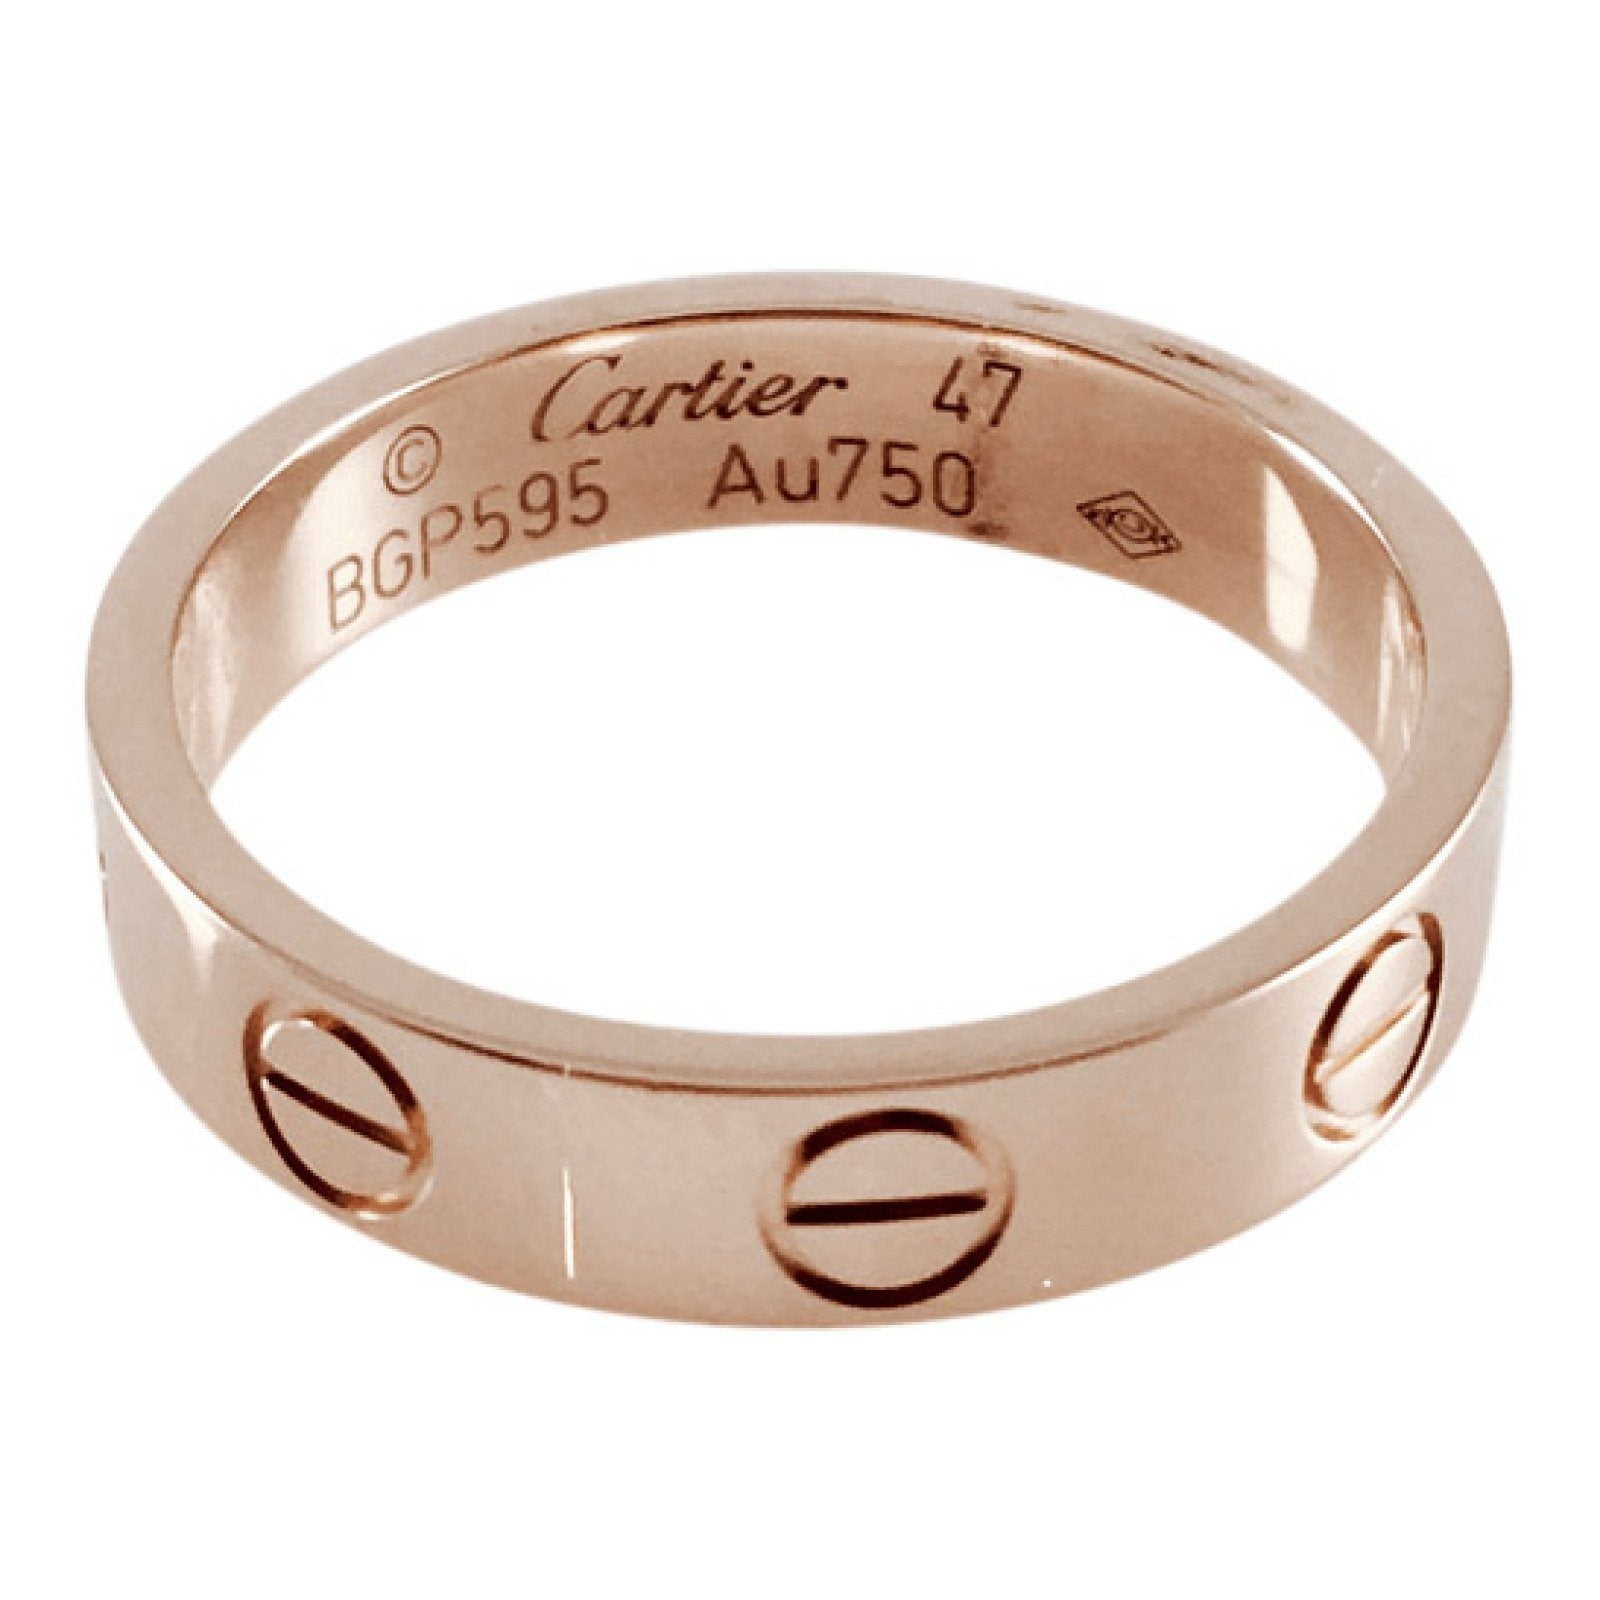 Cartier Love Ring Price / Cartier 18k Pink Gold and Diamond LOVE Solitaire Ring Size  : Shop 